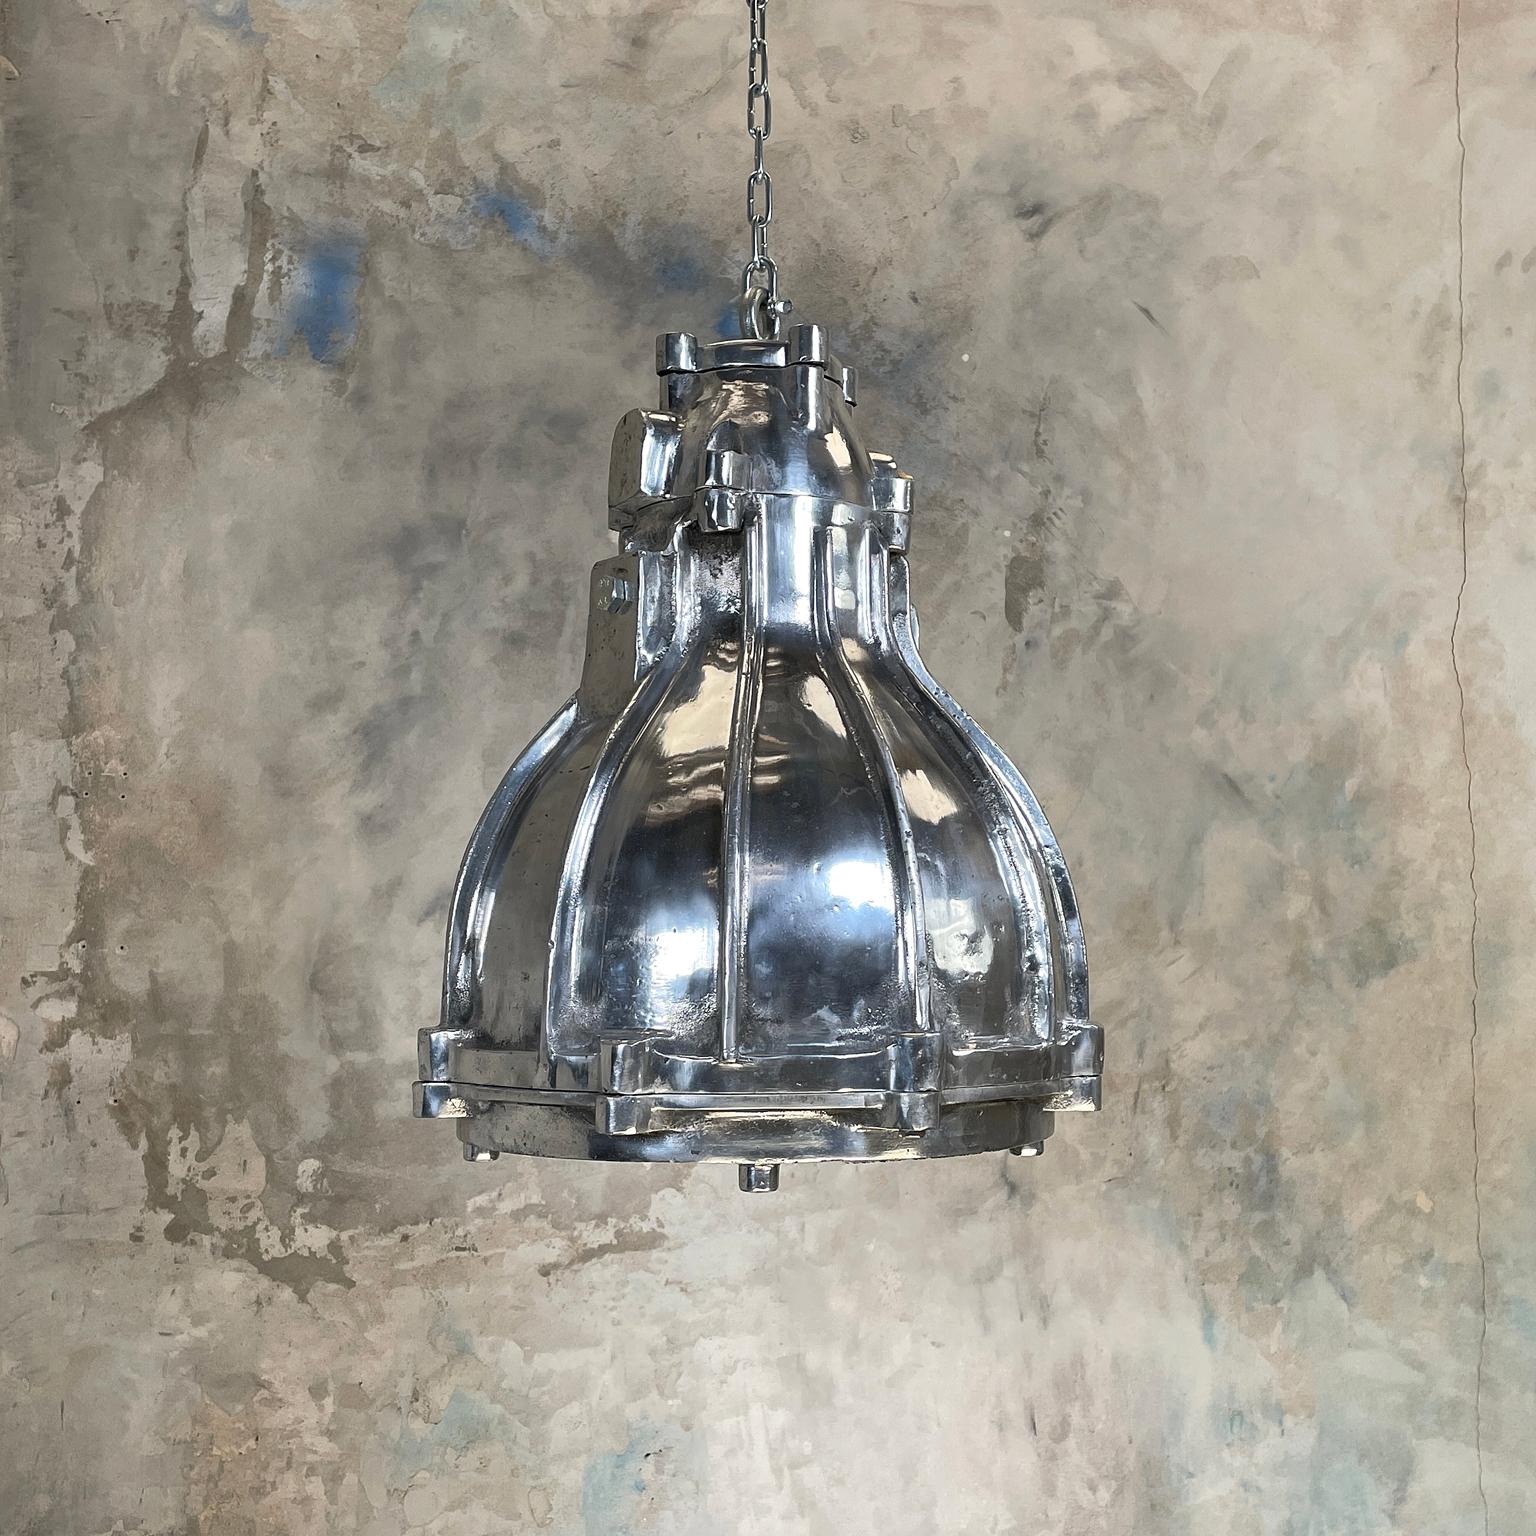 These large vintage cast aluminium flameproof ceiling pendant light fixtures are full of industrial character. Made by British manufacturer Crompton Lamps c1980, the large solid metal design and build make these fixtures perfect for large kitchens,